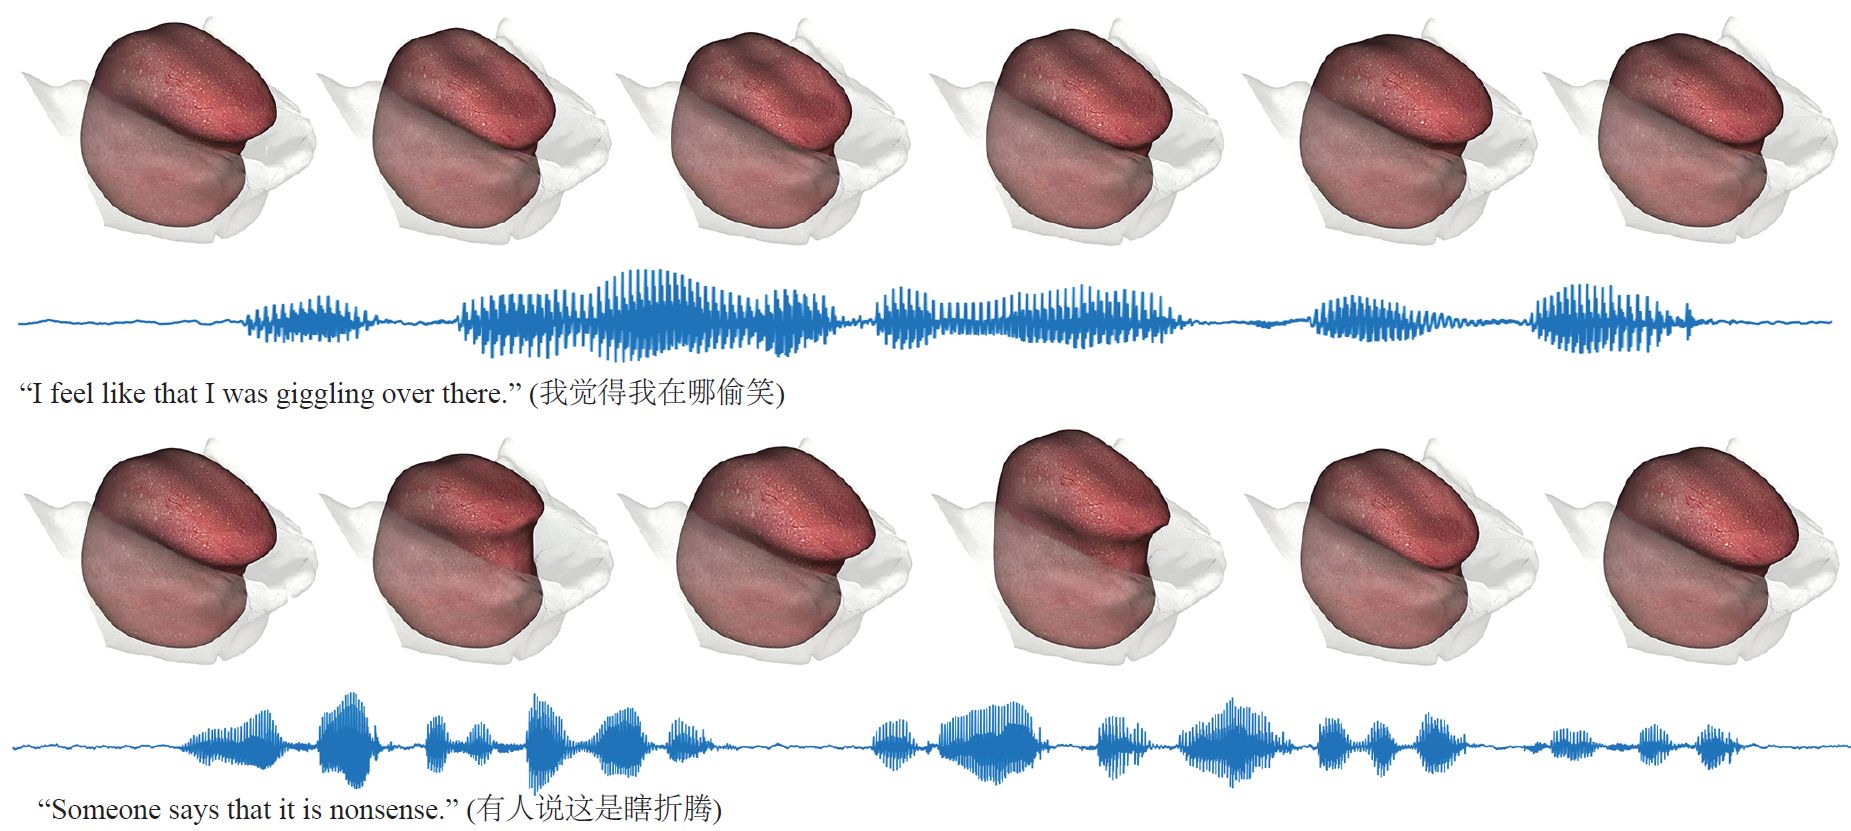 Acoustic VR of Human Tongue Real-time Speech-driven Visual Tongue System